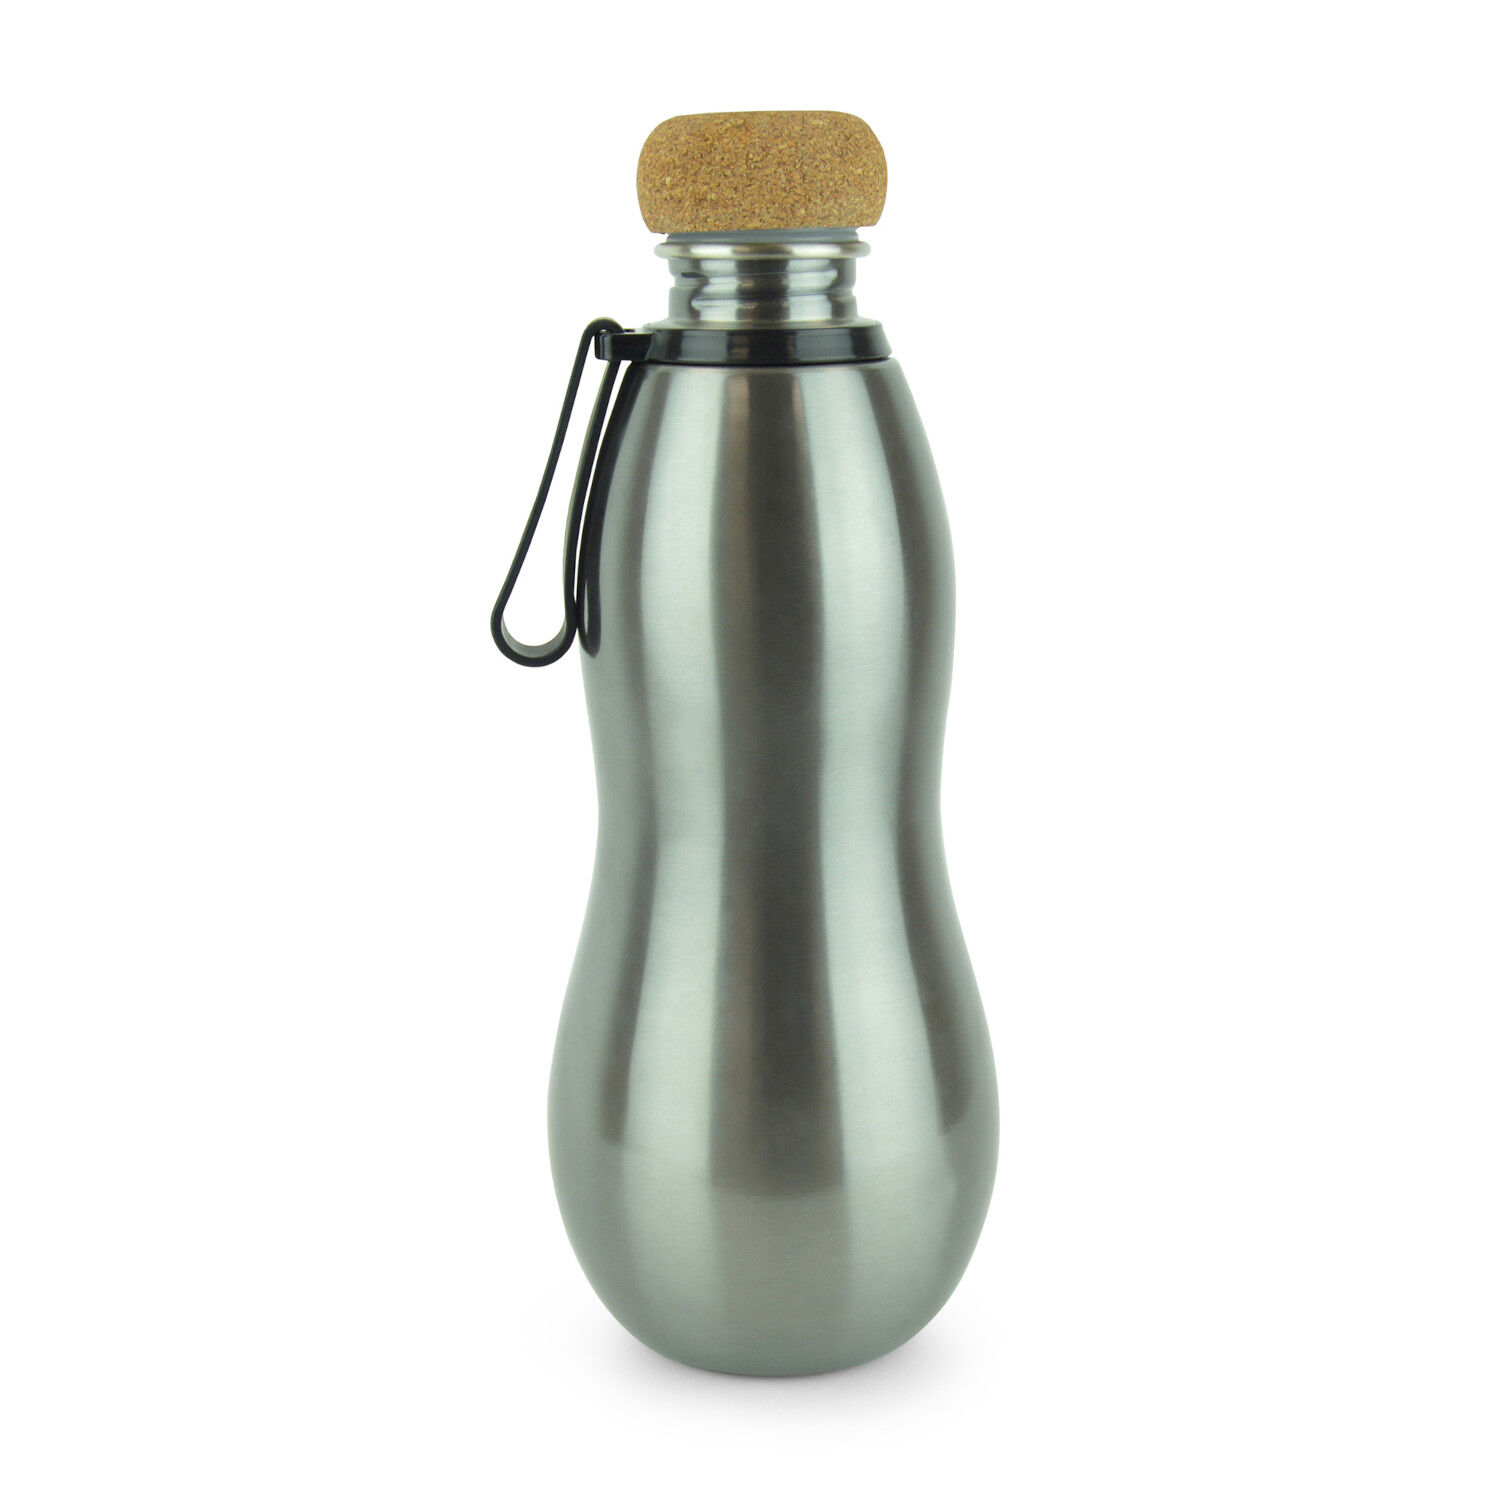 Stainless Steel Drinks Bottle with Cork Lid 690ml